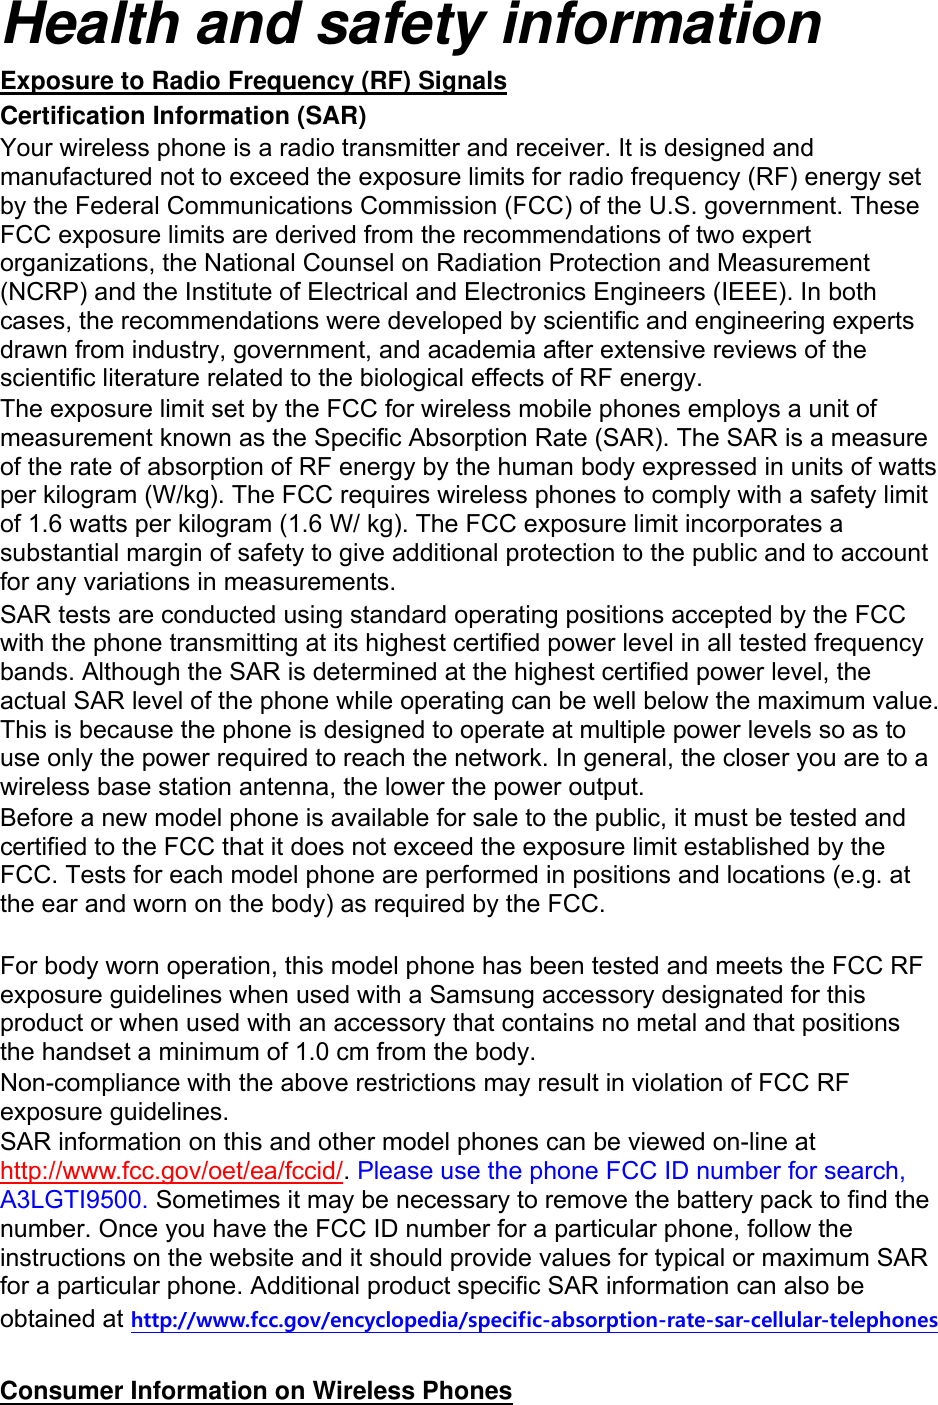 Health and safety information Exposure to Radio Frequency (RF) Signals Certification Information (SAR) Your wireless phone is a radio transmitter and receiver. It is designed and manufactured not to exceed the exposure limits for radio frequency (RF) energy set by the Federal Communications Commission (FCC) of the U.S. government. These FCC exposure limits are derived from the recommendations of two expert organizations, the National Counsel on Radiation Protection and Measurement (NCRP) and the Institute of Electrical and Electronics Engineers (IEEE). In both cases, the recommendations were developed by scientific and engineering experts drawn from industry, government, and academia after extensive reviews of the scientific literature related to the biological effects of RF energy. The exposure limit set by the FCC for wireless mobile phones employs a unit of measurement known as the Specific Absorption Rate (SAR). The SAR is a measure of the rate of absorption of RF energy by the human body expressed in units of watts per kilogram (W/kg). The FCC requires wireless phones to comply with a safety limit of 1.6 watts per kilogram (1.6 W/ kg). The FCC exposure limit incorporates a substantial margin of safety to give additional protection to the public and to account for any variations in measurements. SAR tests are conducted using standard operating positions accepted by the FCC with the phone transmitting at its highest certified power level in all tested frequency bands. Although the SAR is determined at the highest certified power level, the actual SAR level of the phone while operating can be well below the maximum value. This is because the phone is designed to operate at multiple power levels so as to use only the power required to reach the network. In general, the closer you are to a wireless base station antenna, the lower the power output. Before a new model phone is available for sale to the public, it must be tested and certified to the FCC that it does not exceed the exposure limit established by the FCC. Tests for each model phone are performed in positions and locations (e.g. at the ear and worn on the body) as required by the FCC.      For body worn operation, this model phone has been tested and meets the FCC RF exposure guidelines when used with a Samsung accessory designated for this product or when used with an accessory that contains no metal and that positions the handset a minimum of 1.0 cm from the body.   Non-compliance with the above restrictions may result in violation of FCC RF exposure guidelines. SAR information on this and other model phones can be viewed on-line at http://www.fcc.gov/oet/ea/fccid/. Please use the phone FCC ID number for search, A3LGTI9500. Sometimes it may be necessary to remove the battery pack to find the number. Once you have the FCC ID number for a particular phone, follow the instructions on the website and it should provide values for typical or maximum SAR for a particular phone. Additional product specific SAR information can also be obtained at http://www.fcc.gov/encyclopedia/specific-absorption-rate-sar-cellular-telephones  Consumer Information on Wireless Phones 